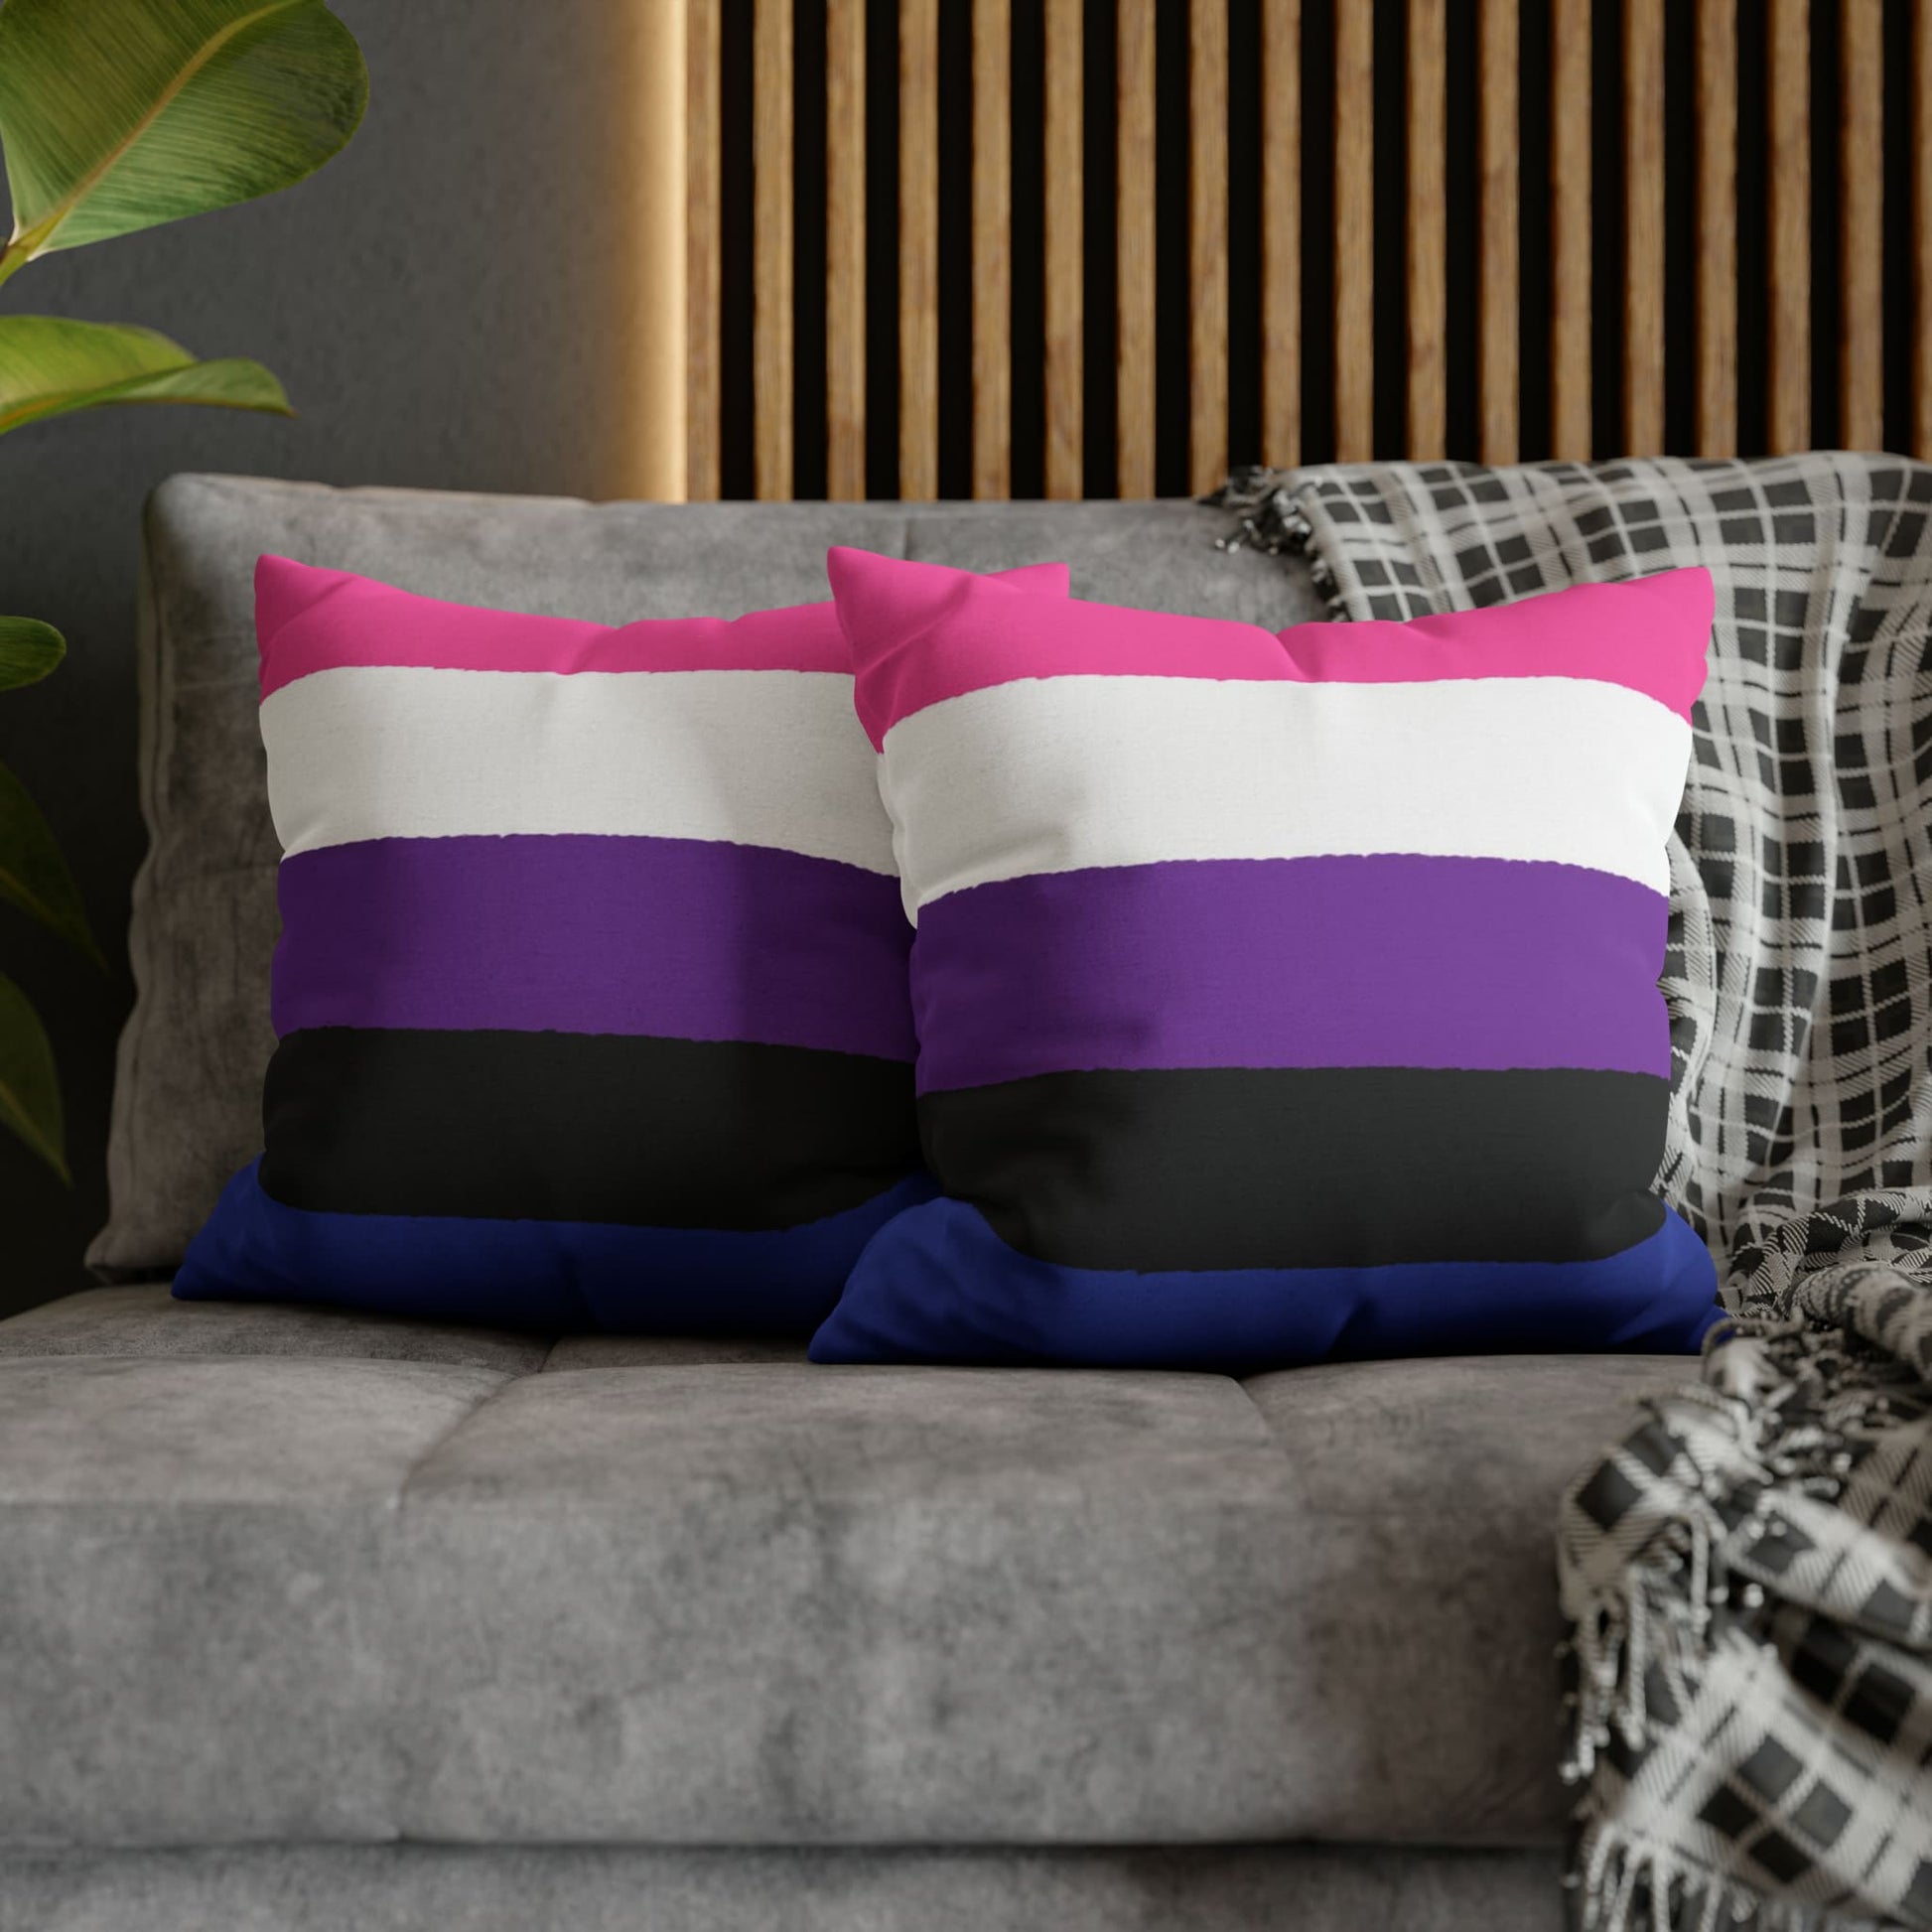 2 genderfluid pillows on couch